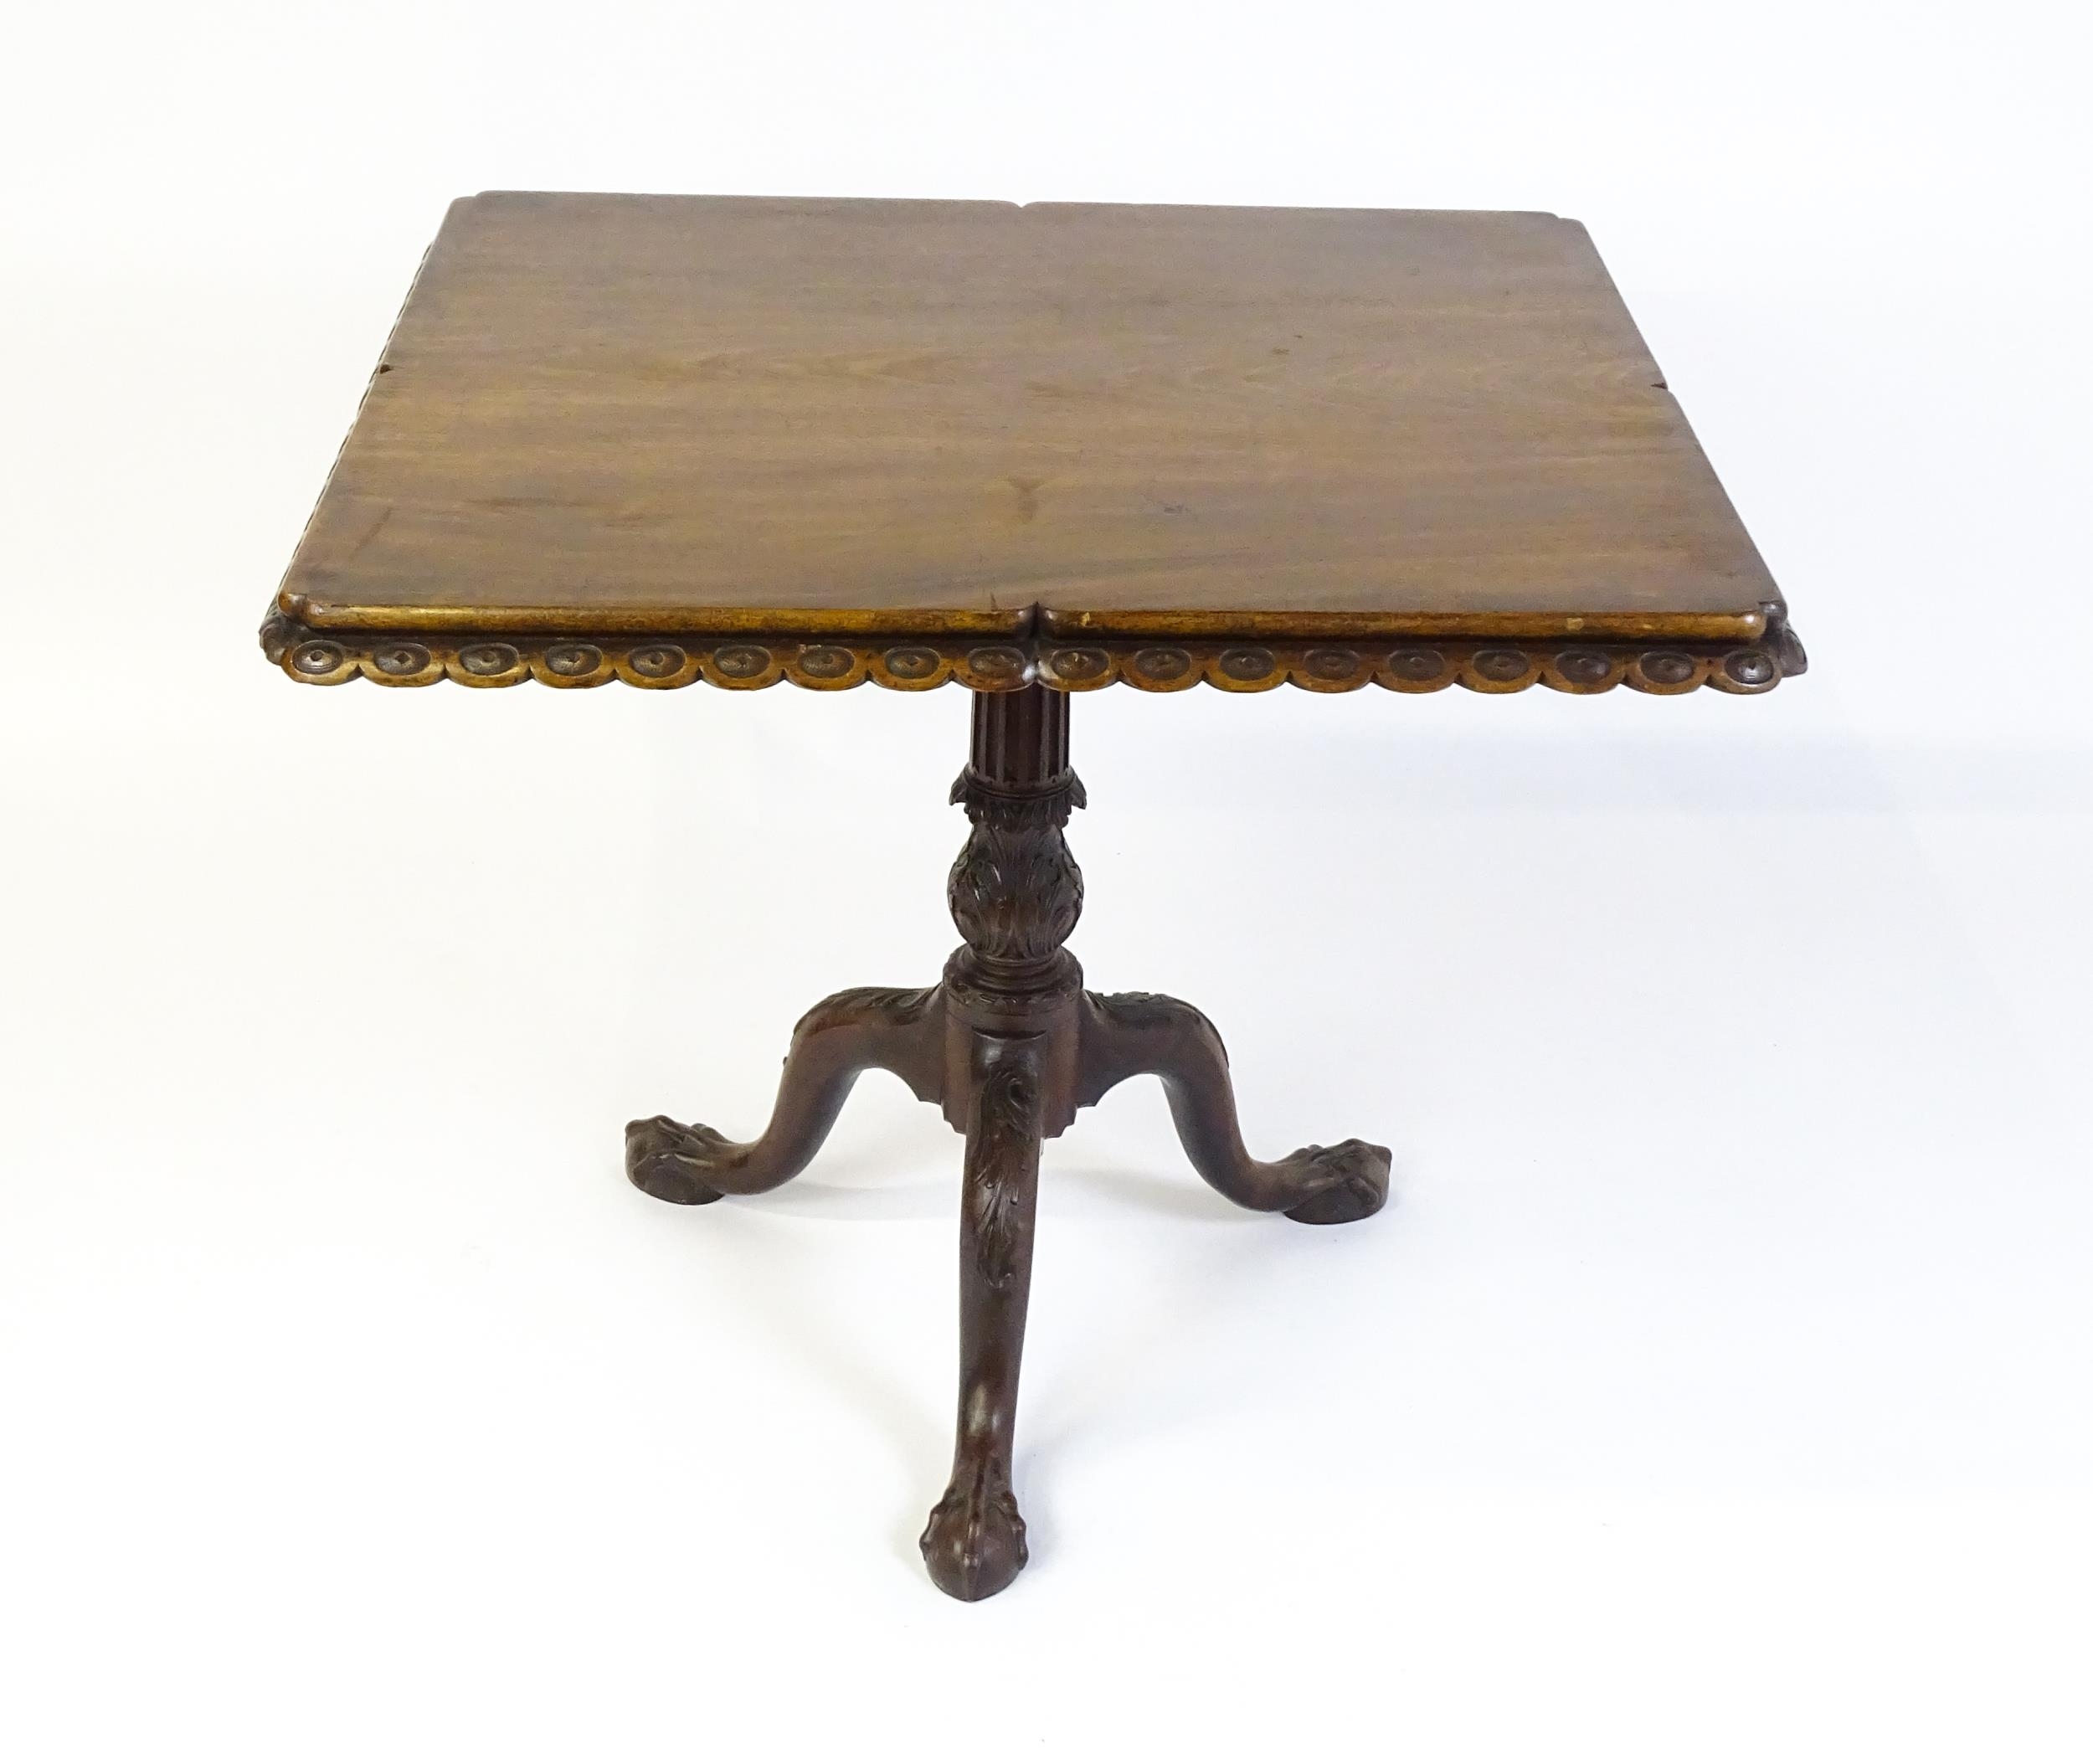 A mid / late 18thC mahogany tilt top table with an unusual moulded surround, re-entrant corners - Image 5 of 15